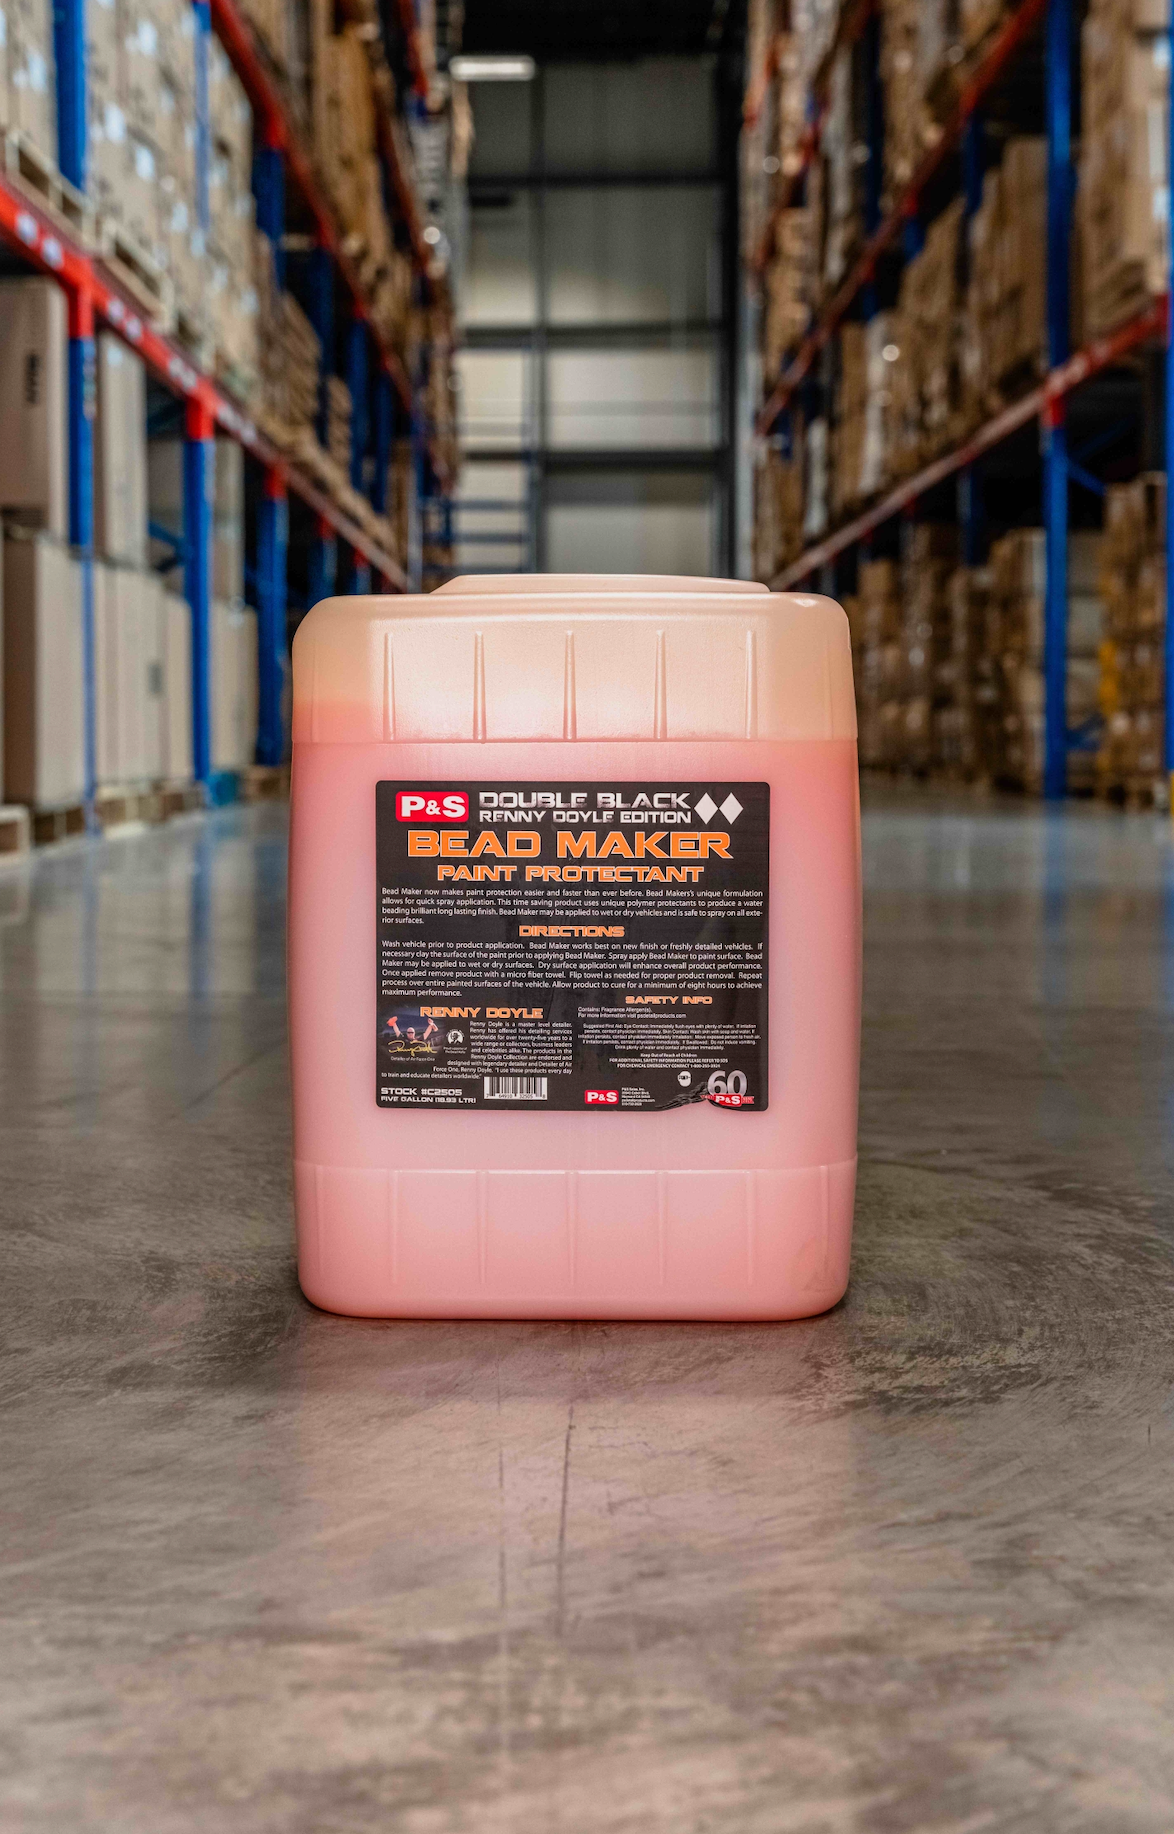 P&S - 5 GALLON | All Purpose Cleaner, Bead Maker, Brake Buster, Carpet Bomber, Iron Buster, Paint Gloss, Pearl Auto Shampoo, Radiance, Swift, True Vue, Undressed Cleaner, and Xpress Interior Cleaner.